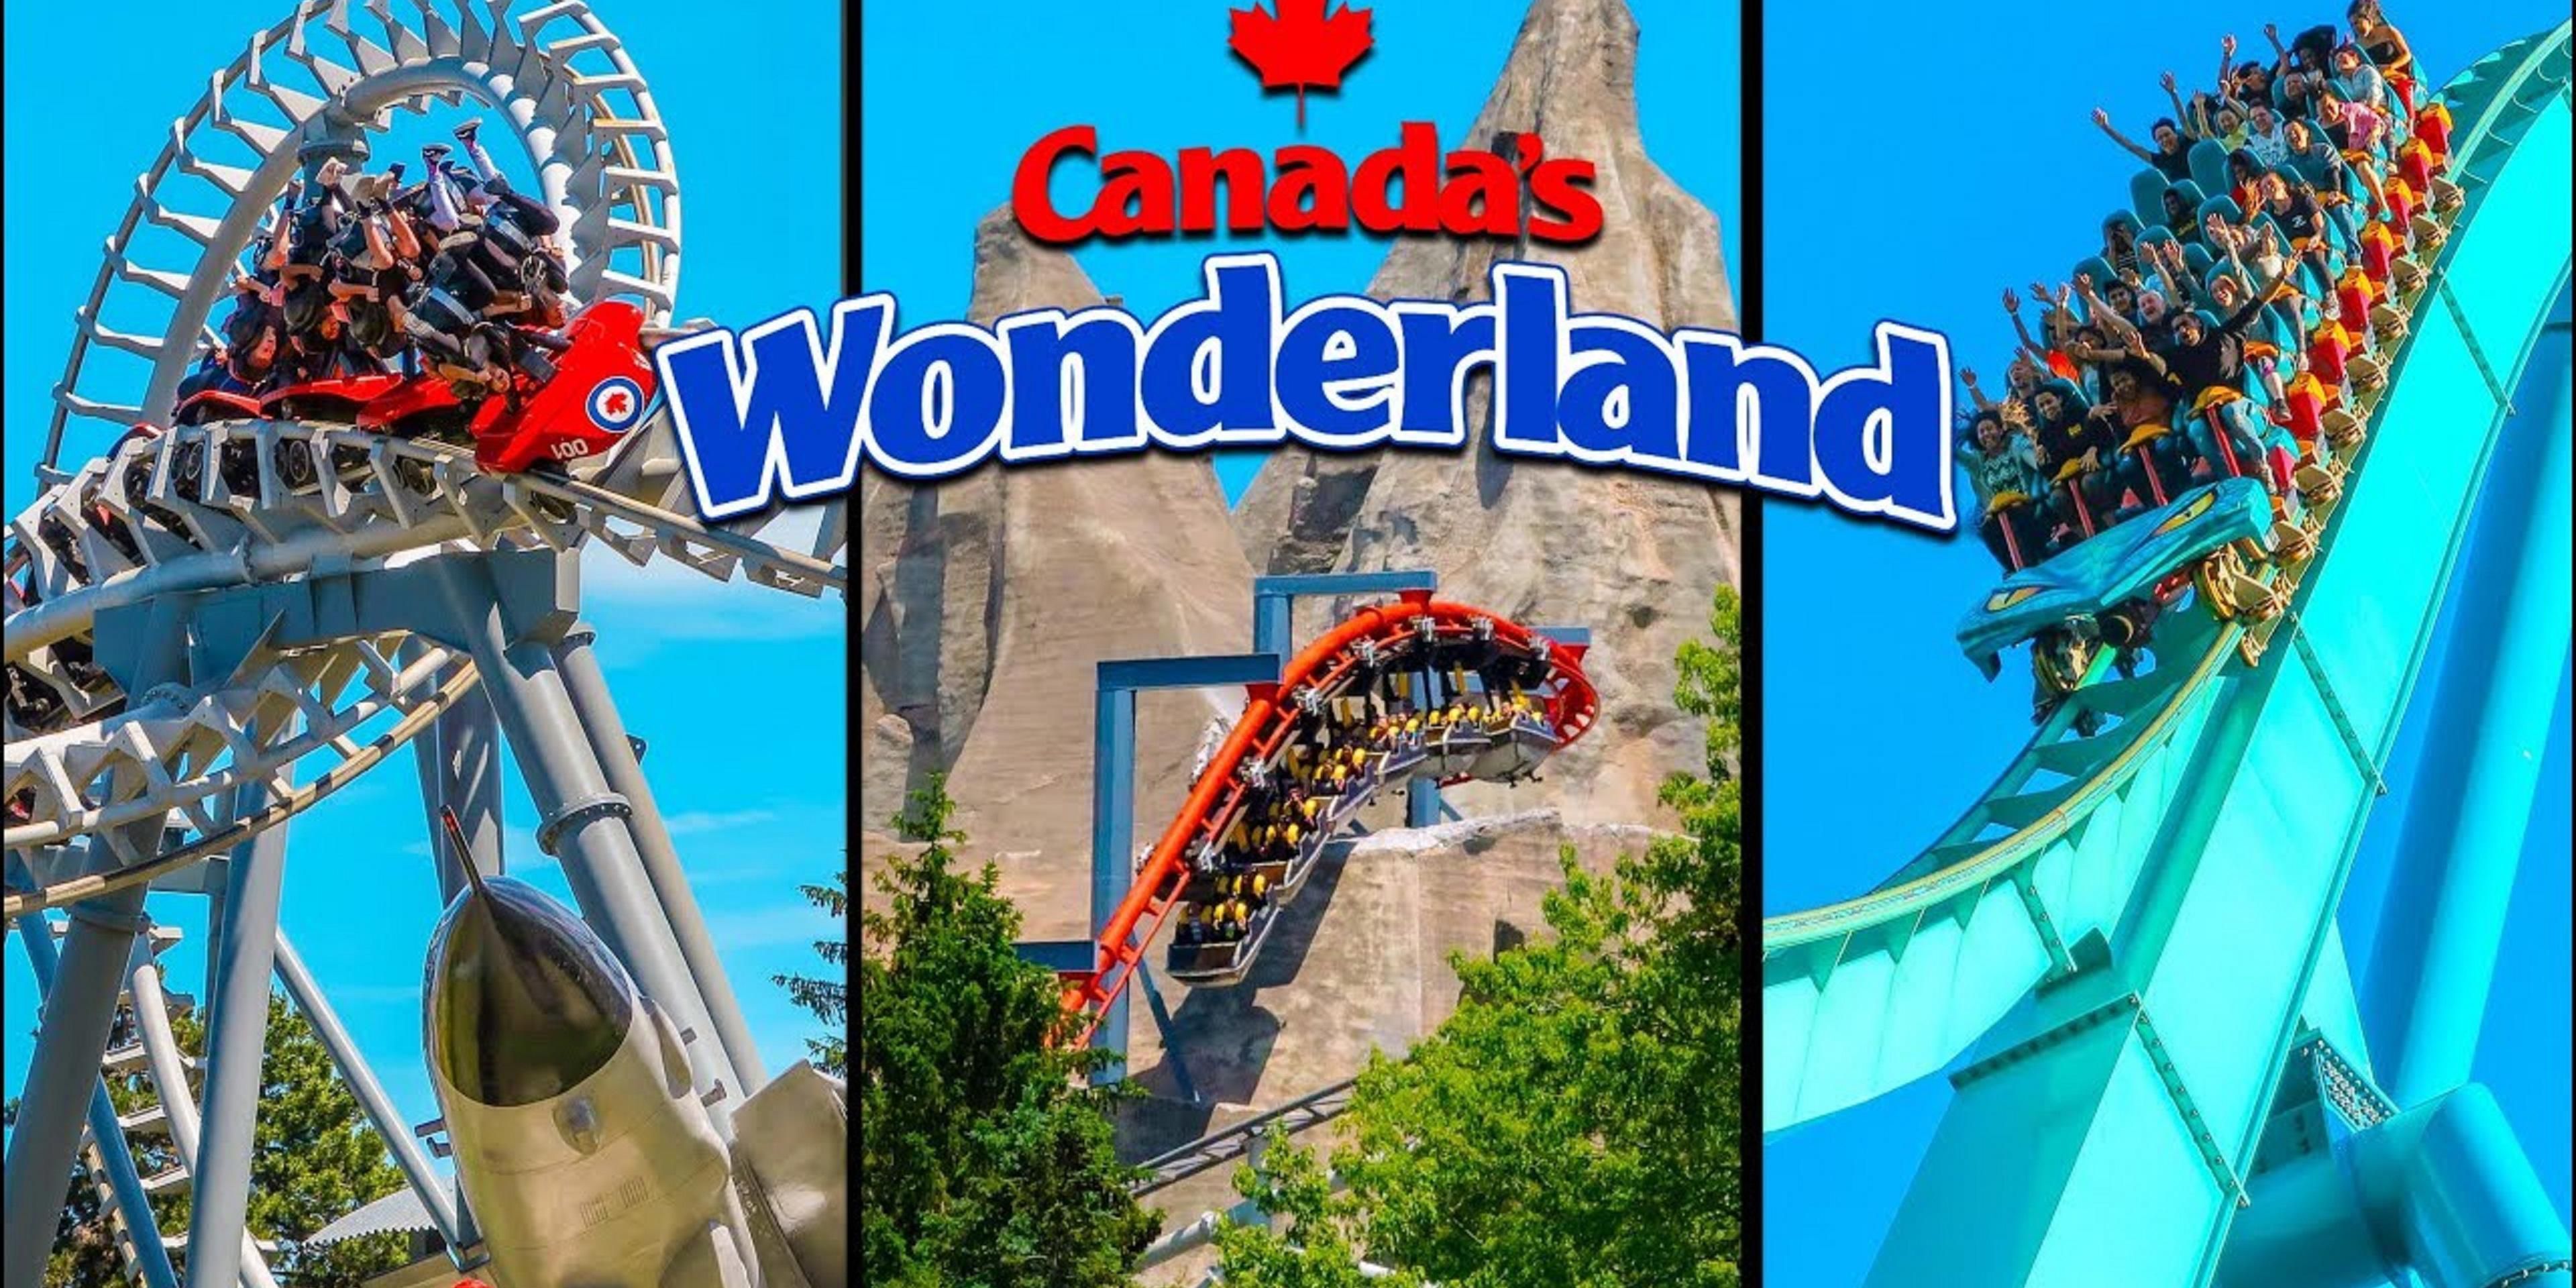 Visit us and enjoy our proximity to local area attractions such as Canada's Wonderland, Wet n Wild Toronto, and Woodbine Racetrack to name a few!  